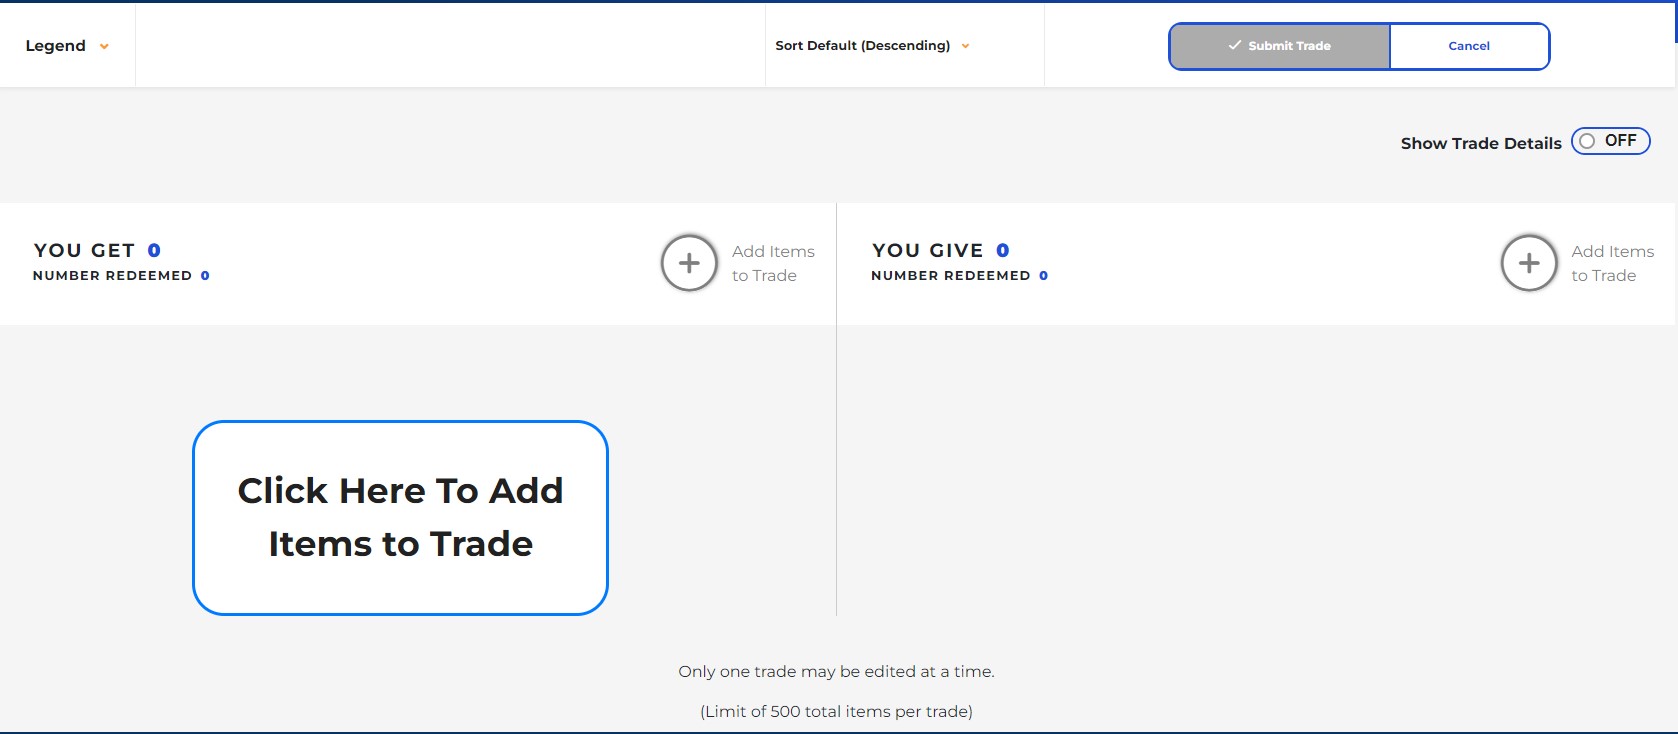 Grid of two sides, left has "You Get" with "Click Here to Add Items to Trade" below. There is a plus sign in a circle to click to add items. right side has "You Give" and the plus sign in a circle to click for adding items